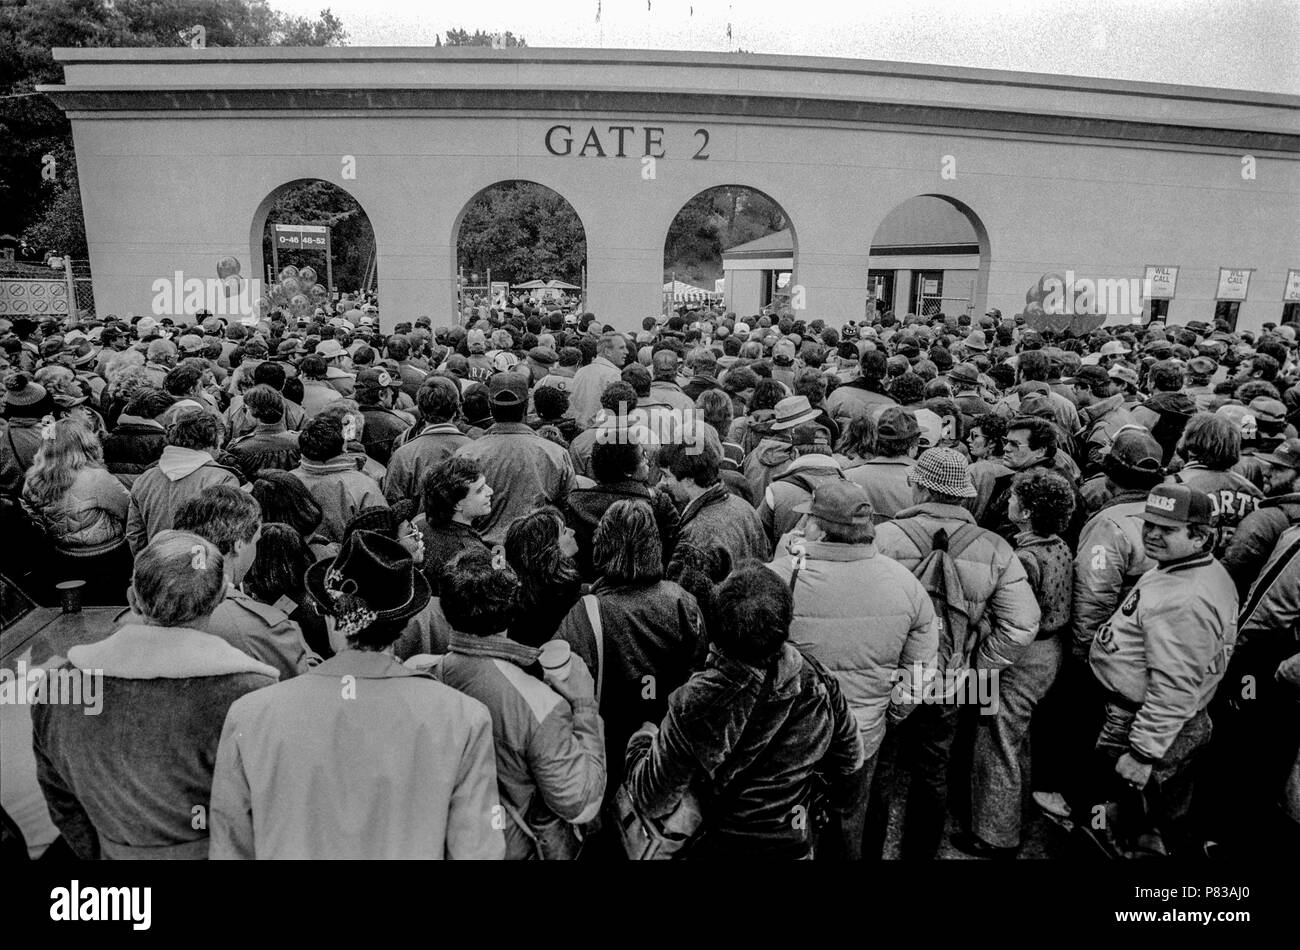 Stanford, California, USA. 20th Jan, 1985. Crowd files through gate 2 on the way into the stadium after leaving the Super Bowl XIX tailgate on the Stanford University campus. The San Francisco 49ers defeated the Miami Dolphins 38-16 on Sunday, January 20, 1985. Credit: Al Golub/ZUMA Wire/Alamy Live News Stock Photo